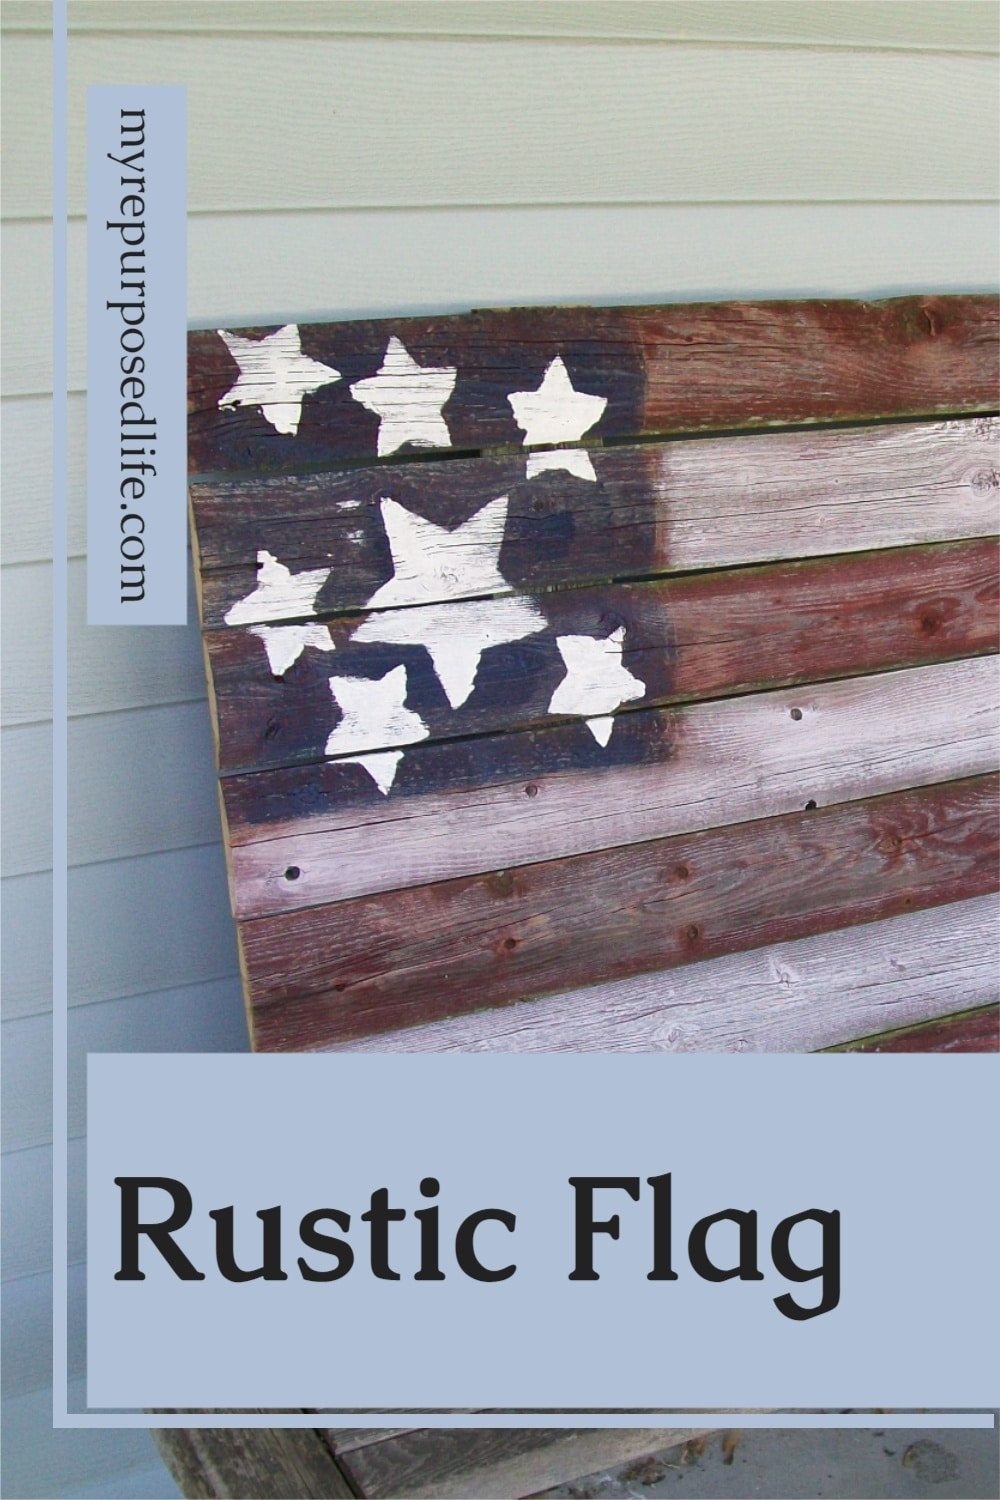 How to make a rustic flag out of bits and pieces of old gray picket fencing. Easy afternoon project to make with the kids or grandkids. #MyRepurposedLife #upcycled #fence #rustic #flag #4thofjuly #patriotic #decor via @repurposedlife